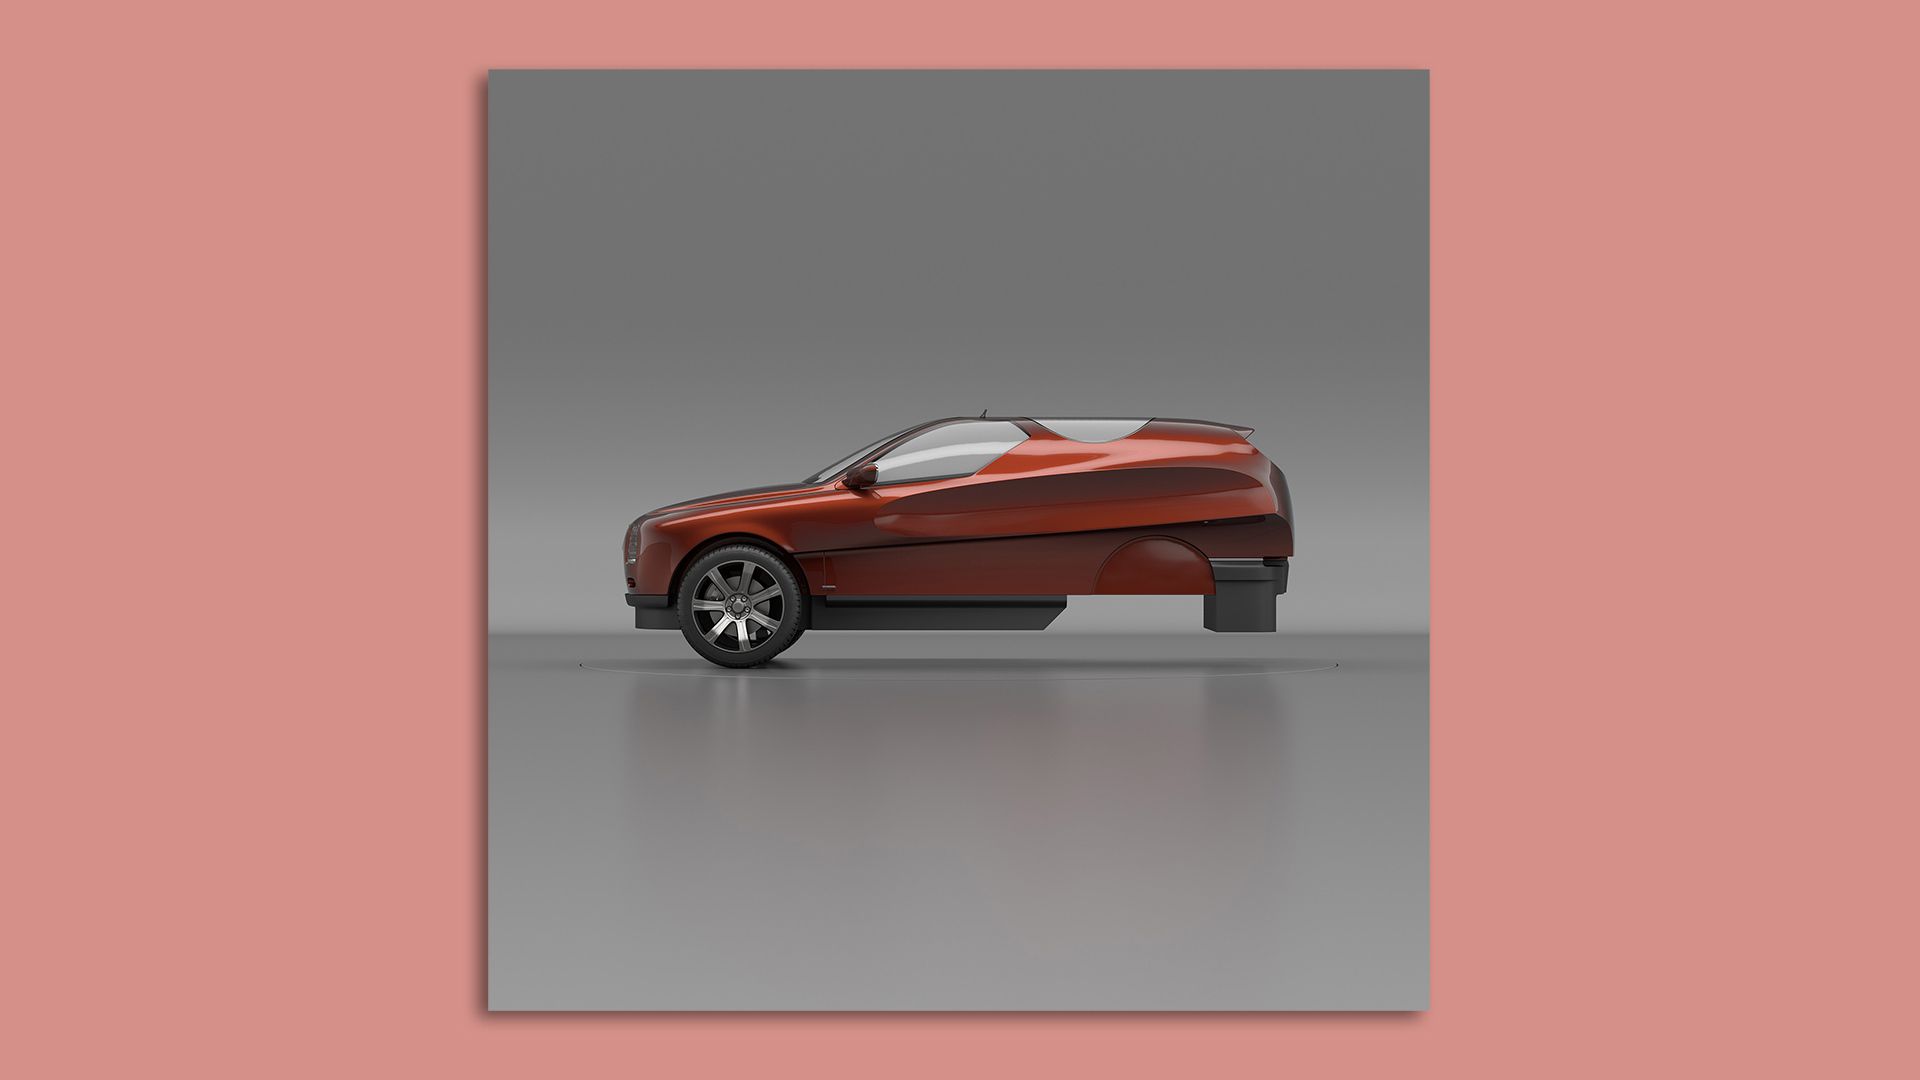 Image of a car model in "Lambent Earth," a coppery brown color, from BASF